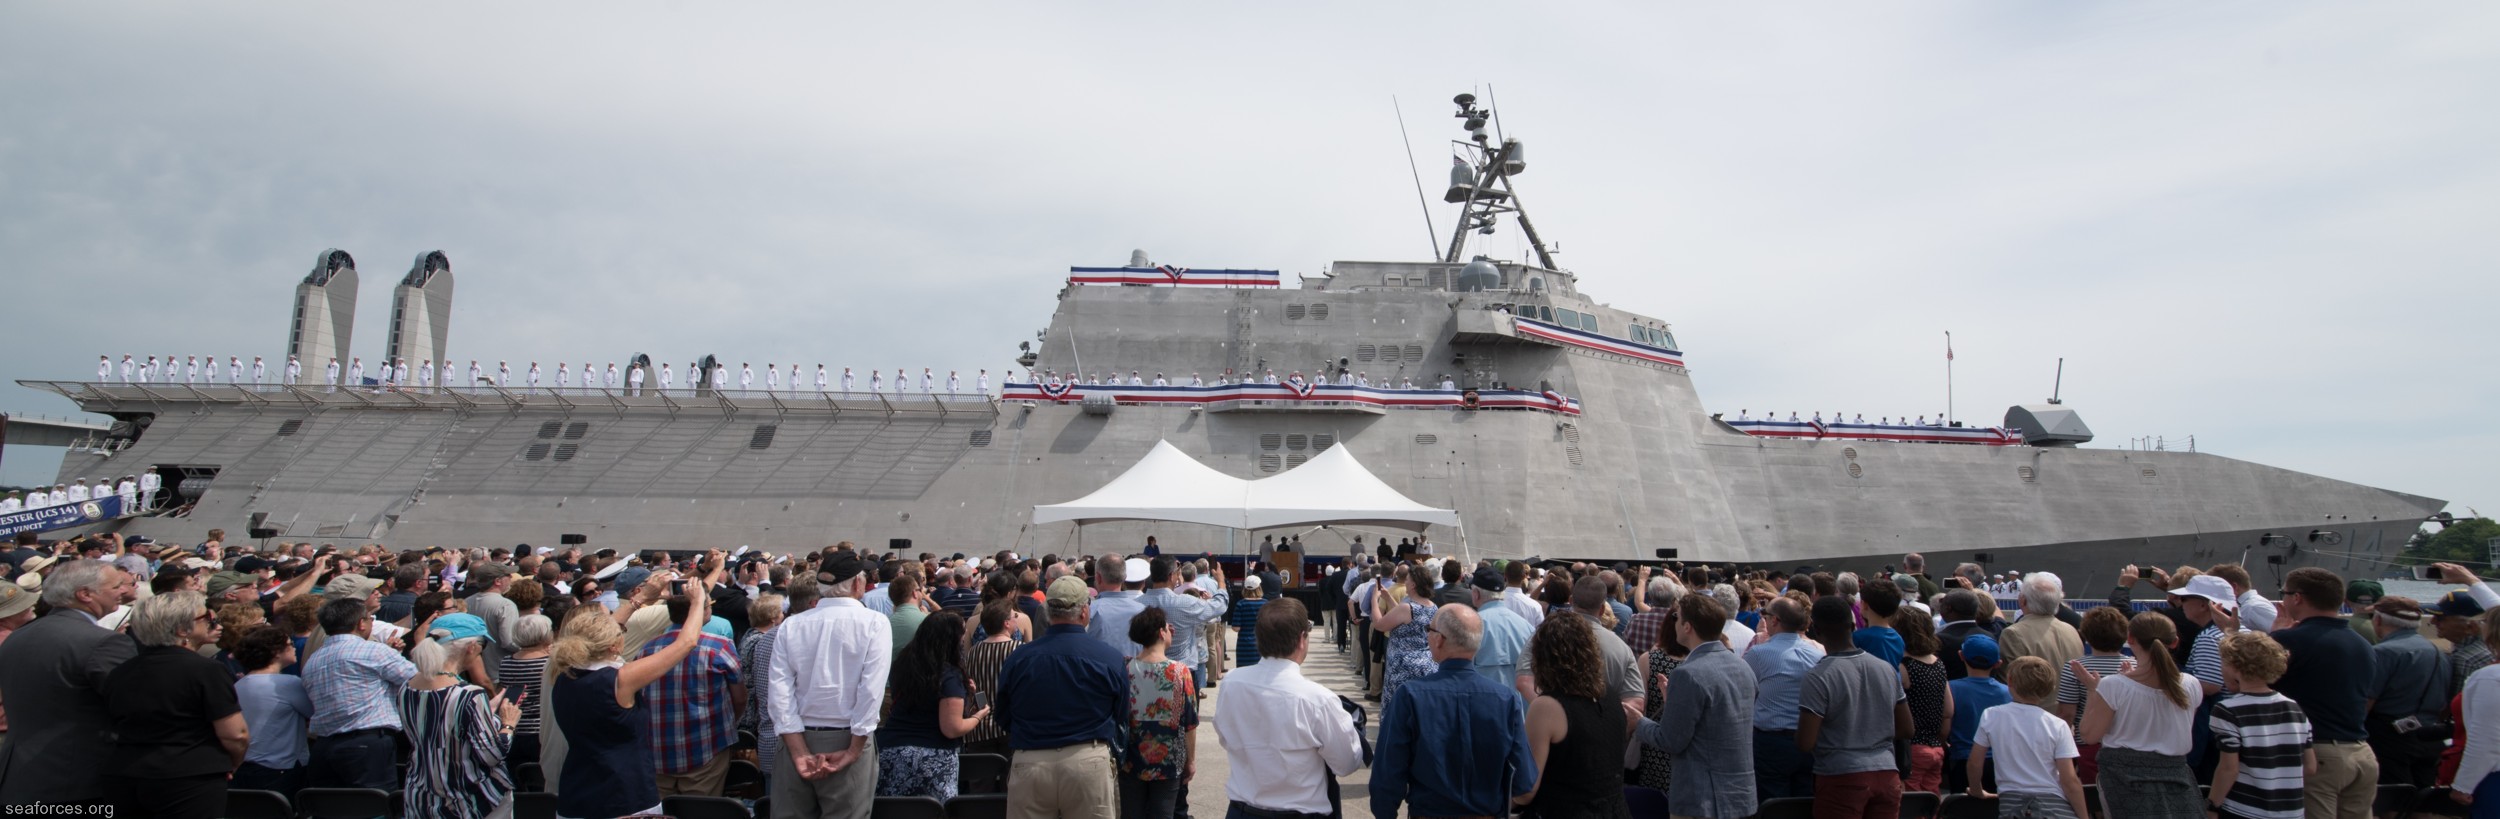 lcs-14 uss manchester littoral combat ship us navy 02 commissioning ceremony portsmouth new hampshire may 2018